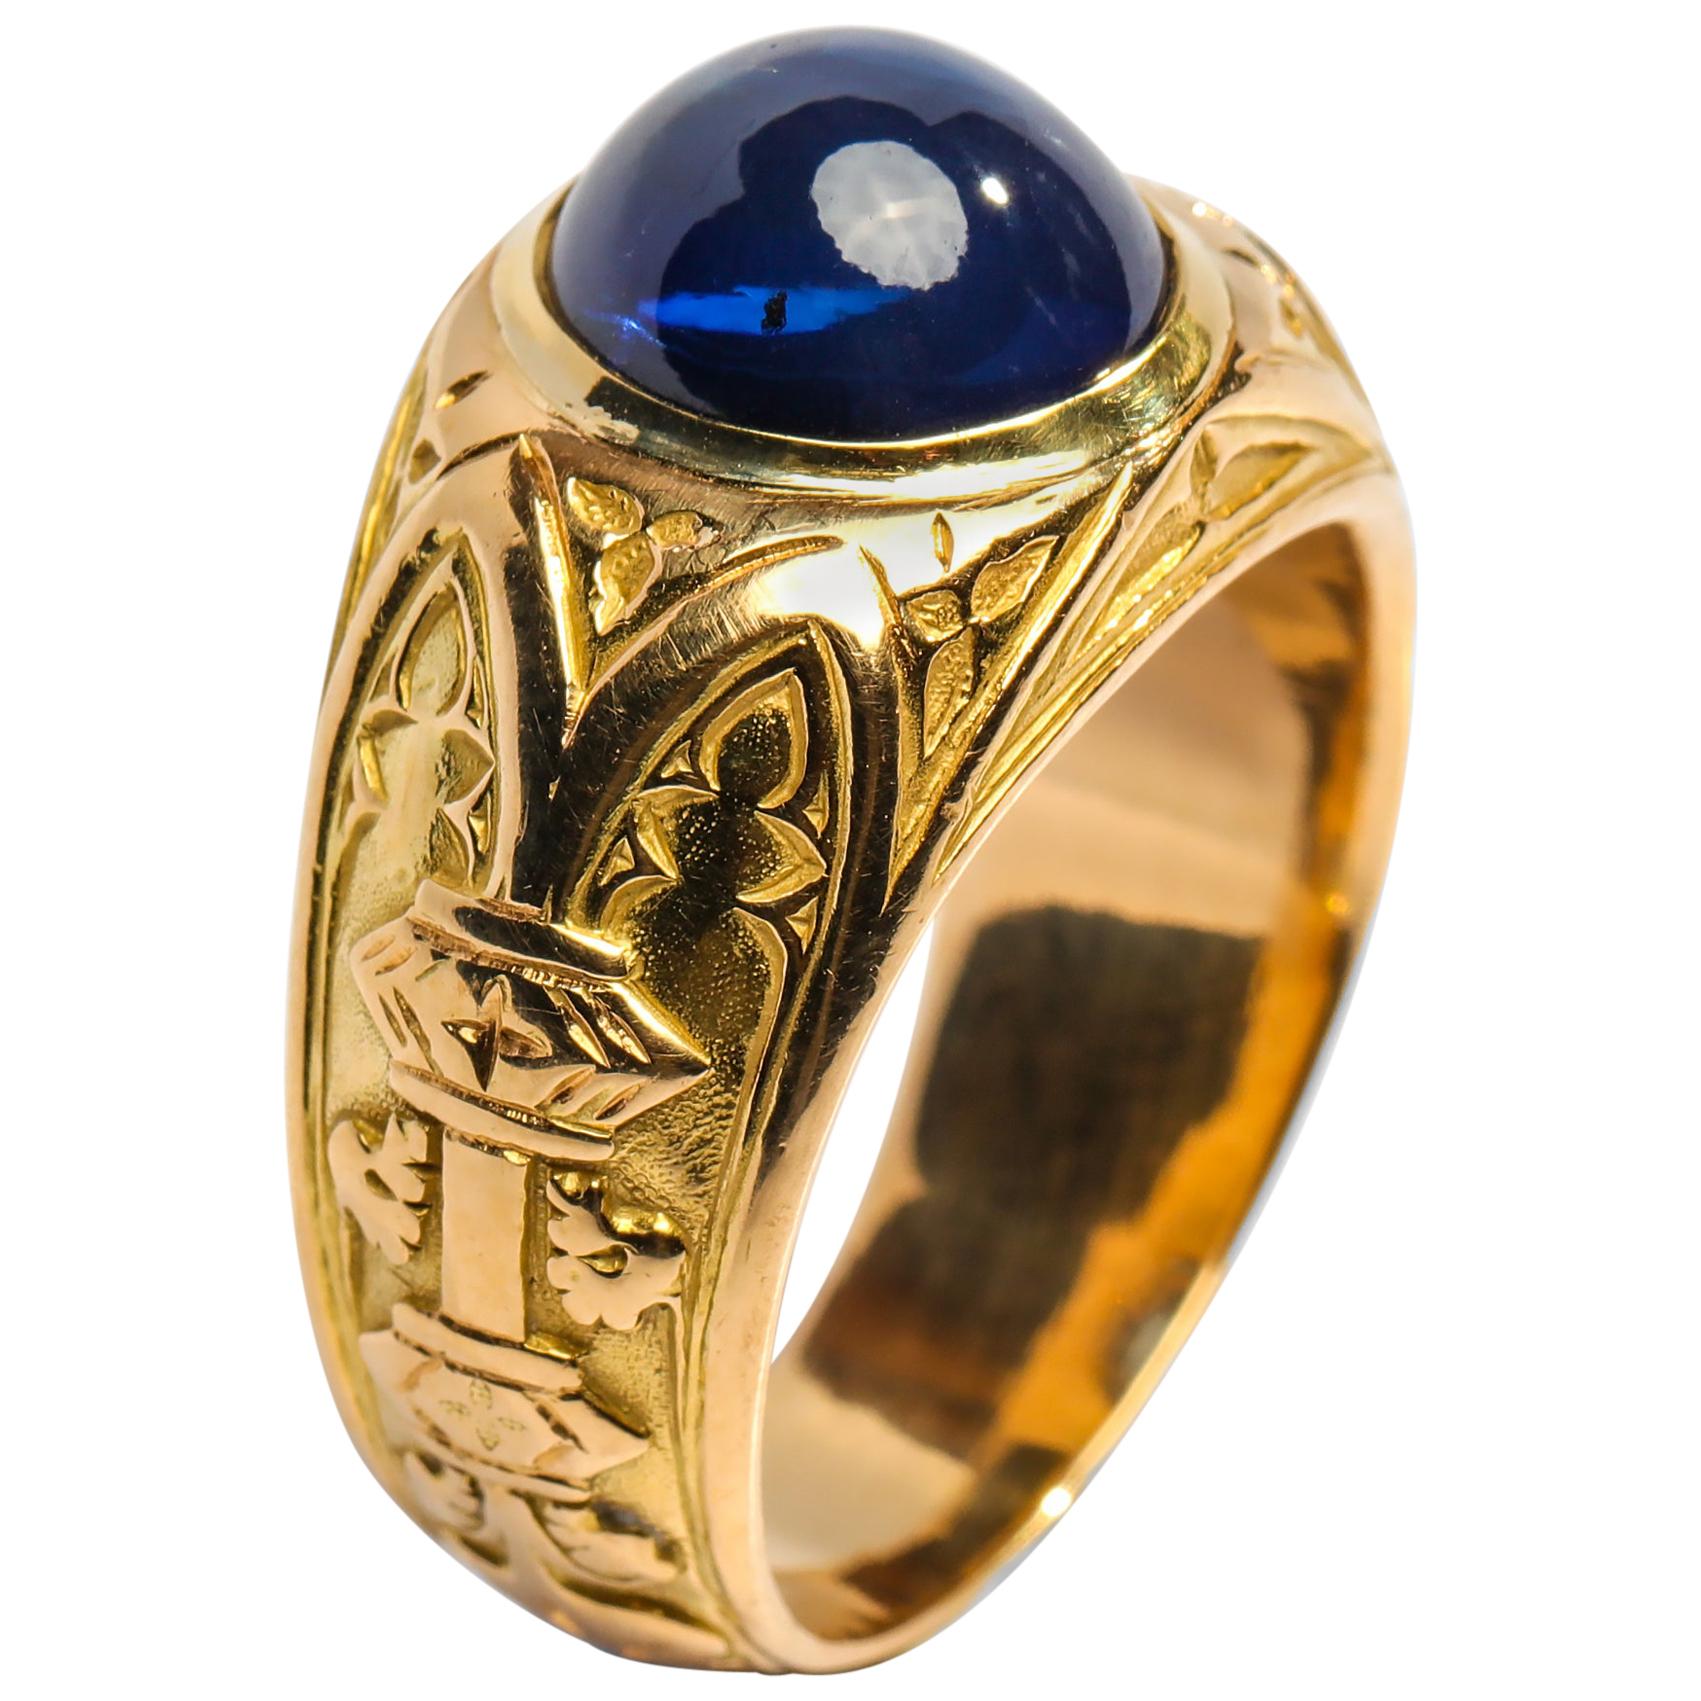 Tiffany & Co. Gilded Age Men's Sapphire Ring as Featured in the New York Times